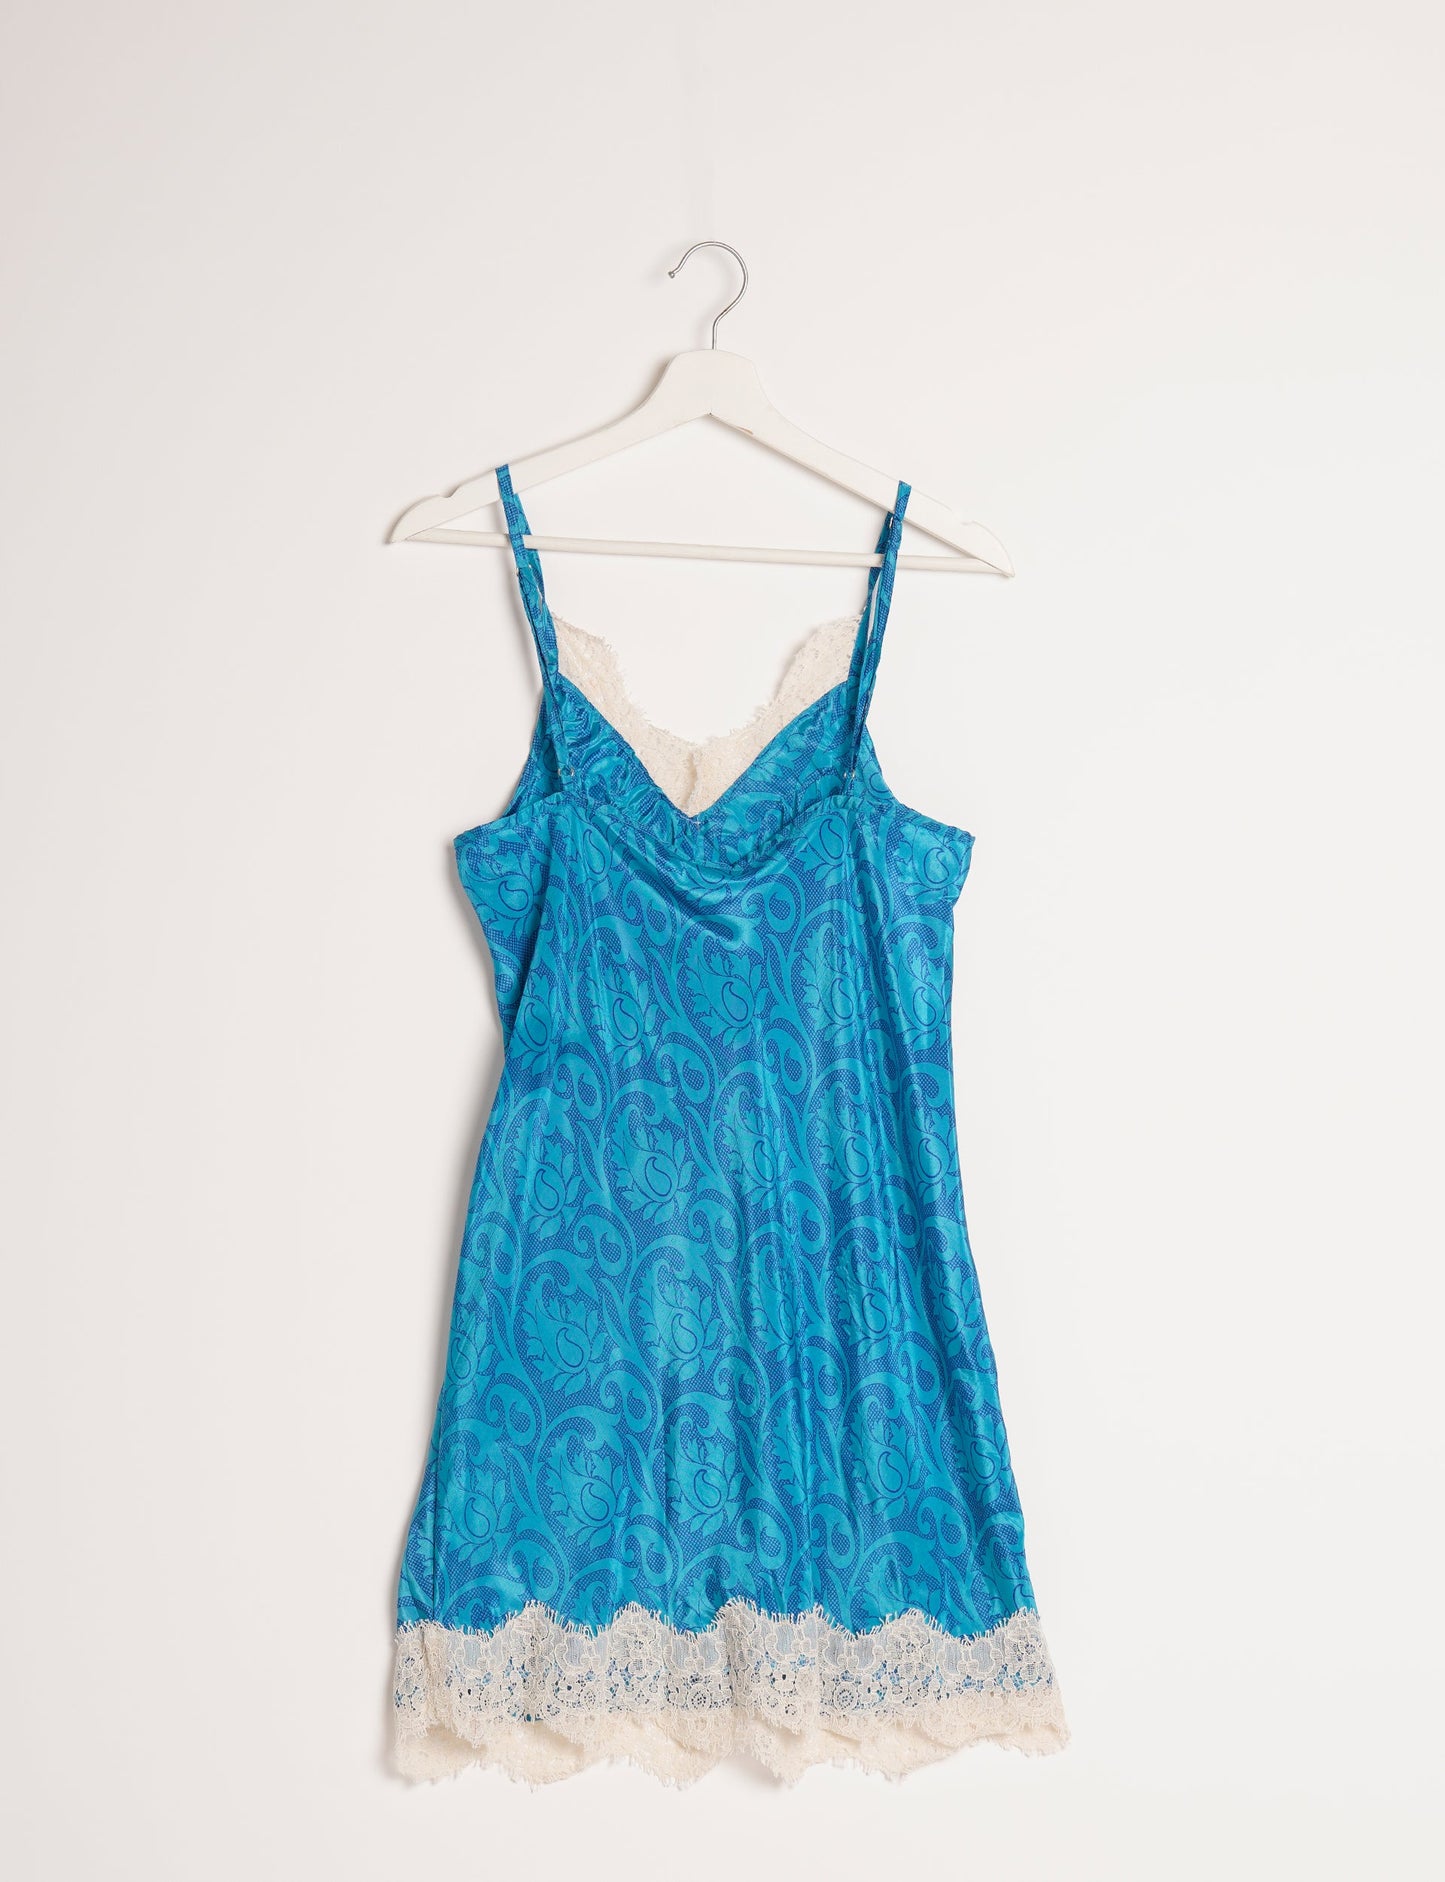 Experience nighttime luxury with our NIGHT DRESS – a true sleeping beauty crafted from upcycled sari fabric by dedicated artisans. Seamlessly combining purpose and comfort, these nightdresses offer a relaxed fit and lightweight material, ideal for sleeping, lounging, or enjoying a tranquil moment sipping coffee on your balcony.